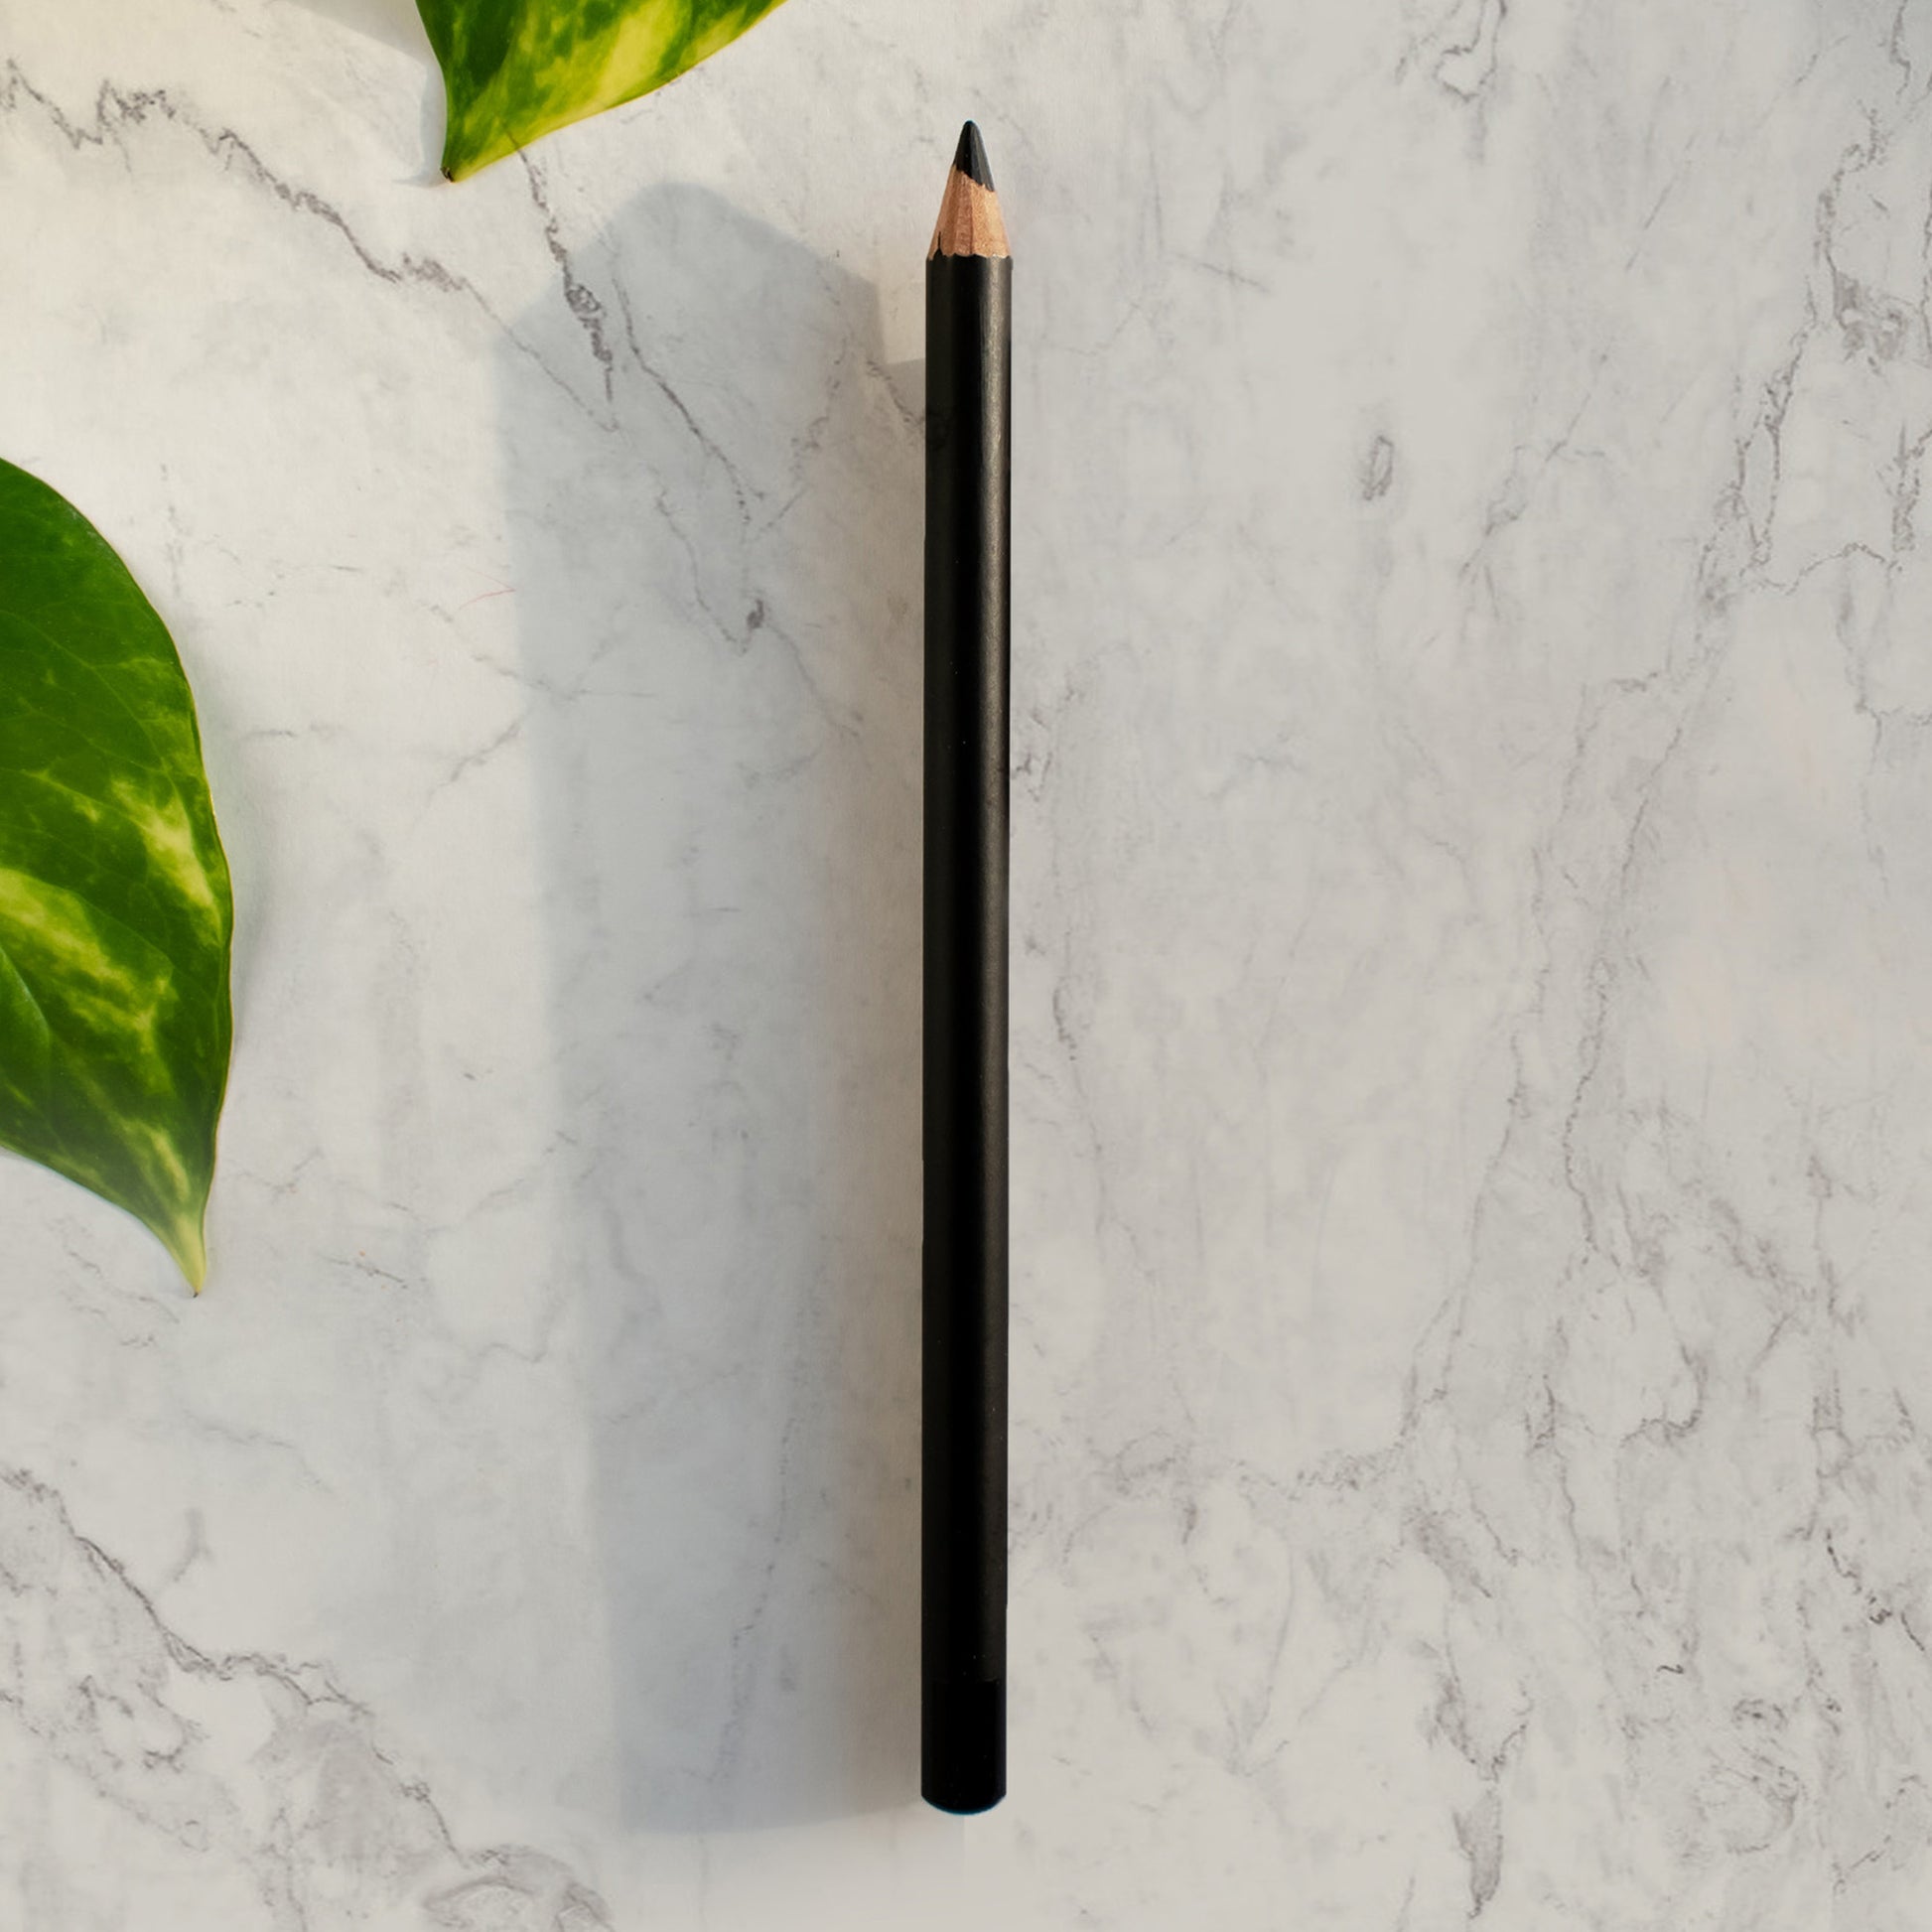 Experience a perfect pout with the Cruisin Organics Charm Lip Pencil. Its creamy texture and precise application allows for charming lip luster, while providing a flawless and polished finish. Enjoy the benefits of this high-quality lip pencil, perfectly suited for your natural lip color.